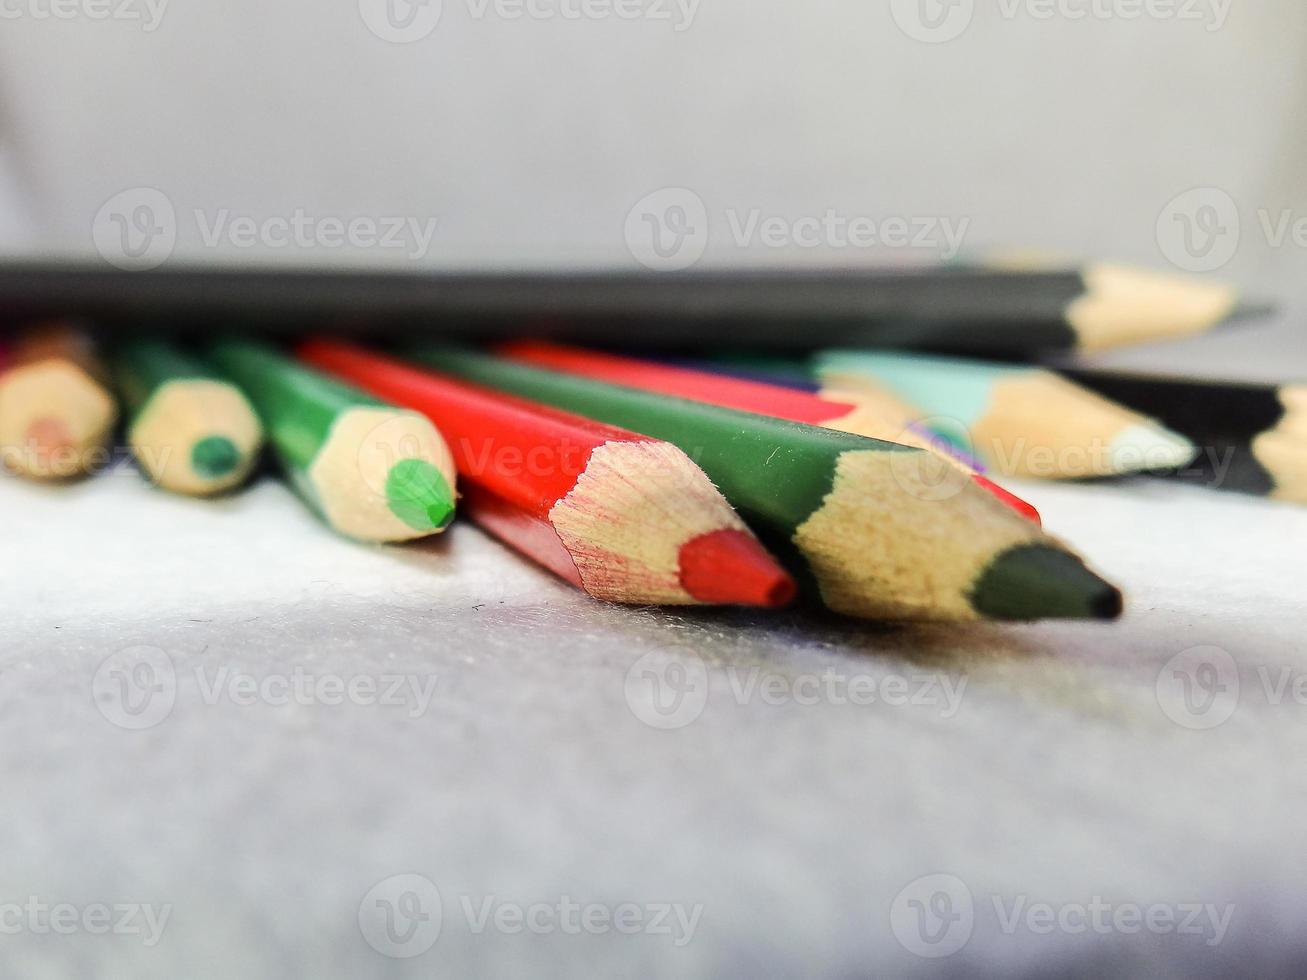 Colored pencils group photo